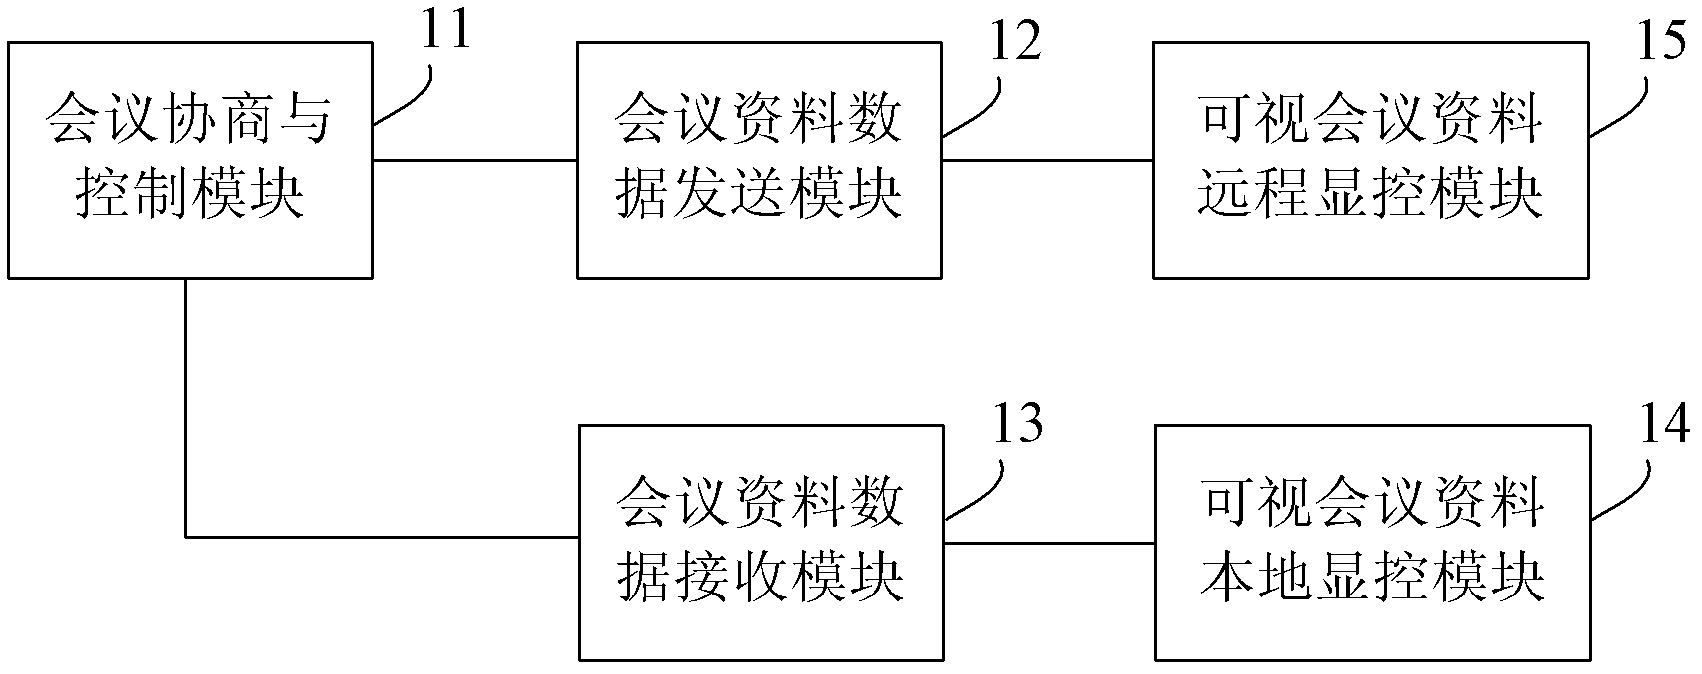 Mobile terminal and method for realizing teleconference based on same